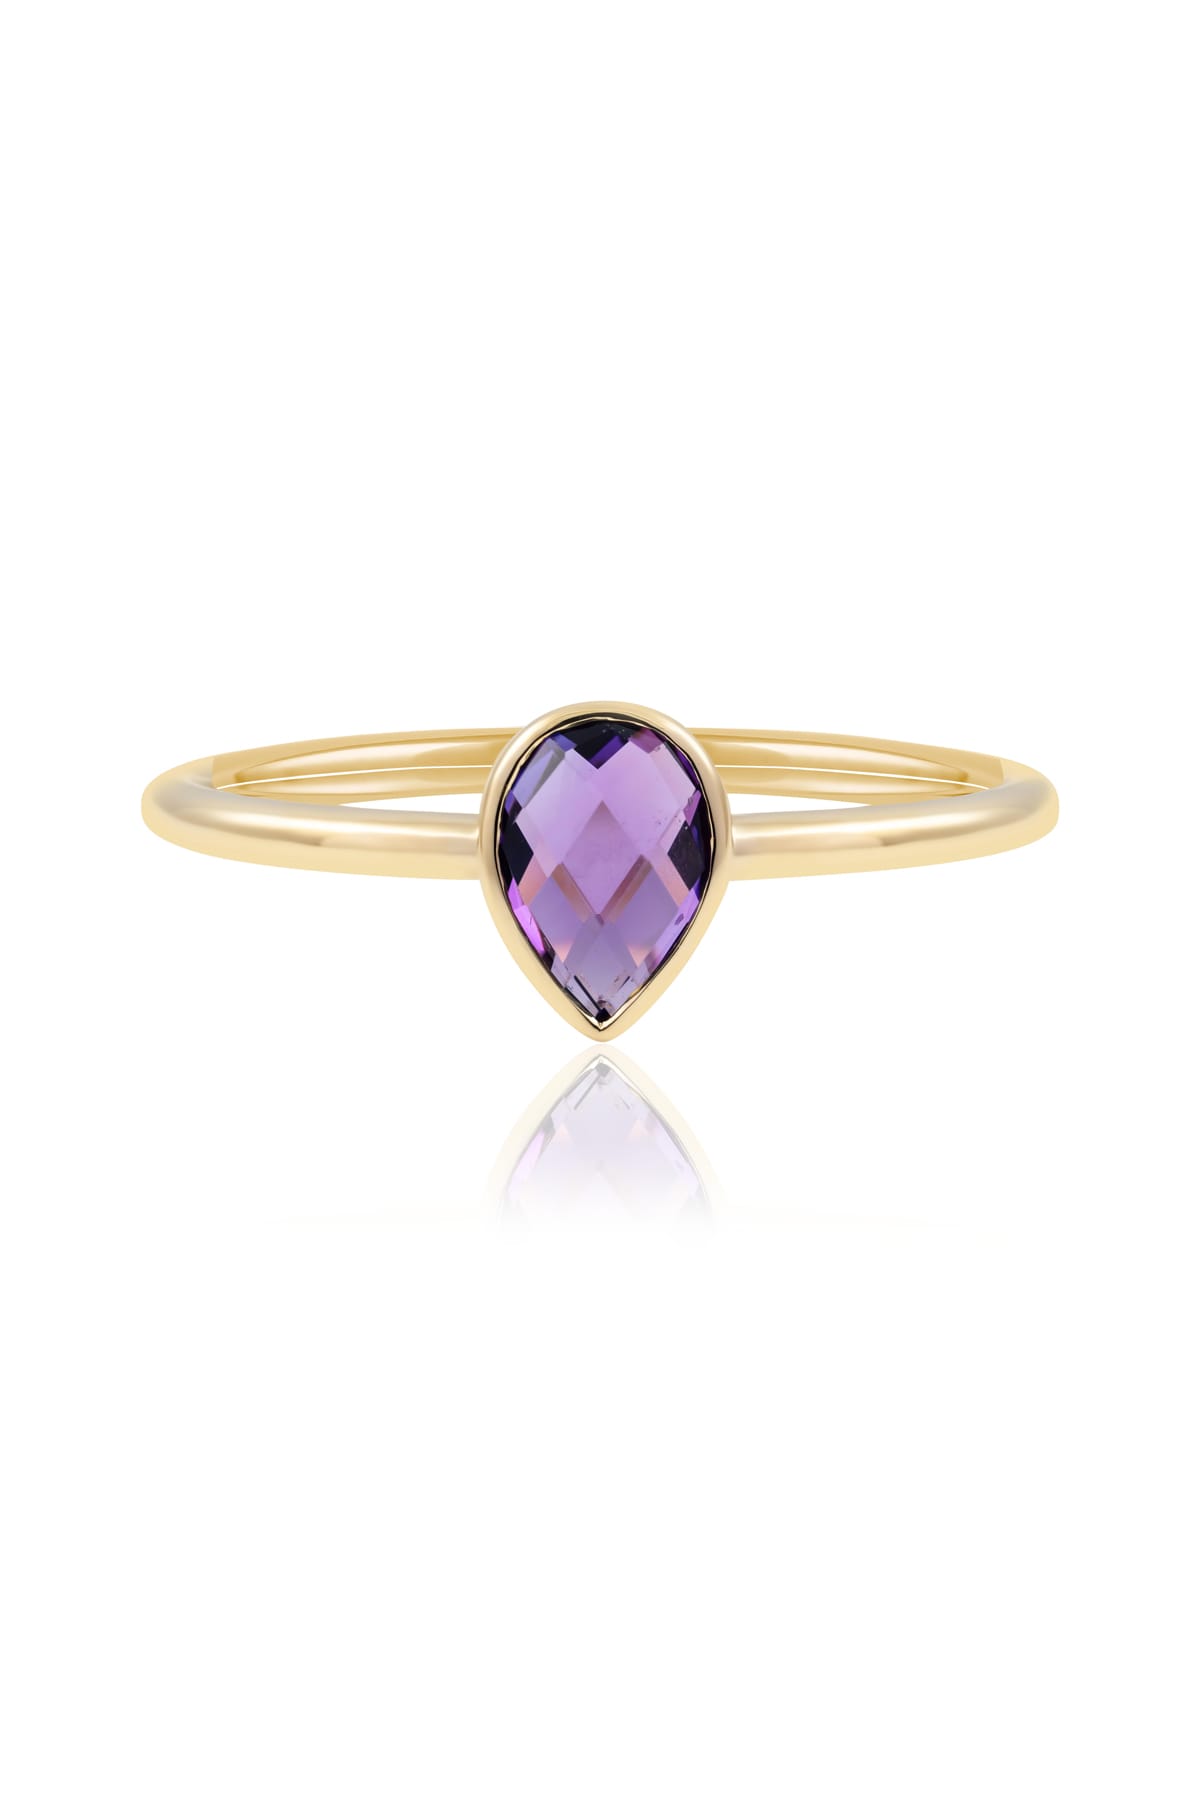 0.70ct Pear Cut Bezel Set Amethyst Solitaire Ring from LeGassick Jewellers Gold Coast.